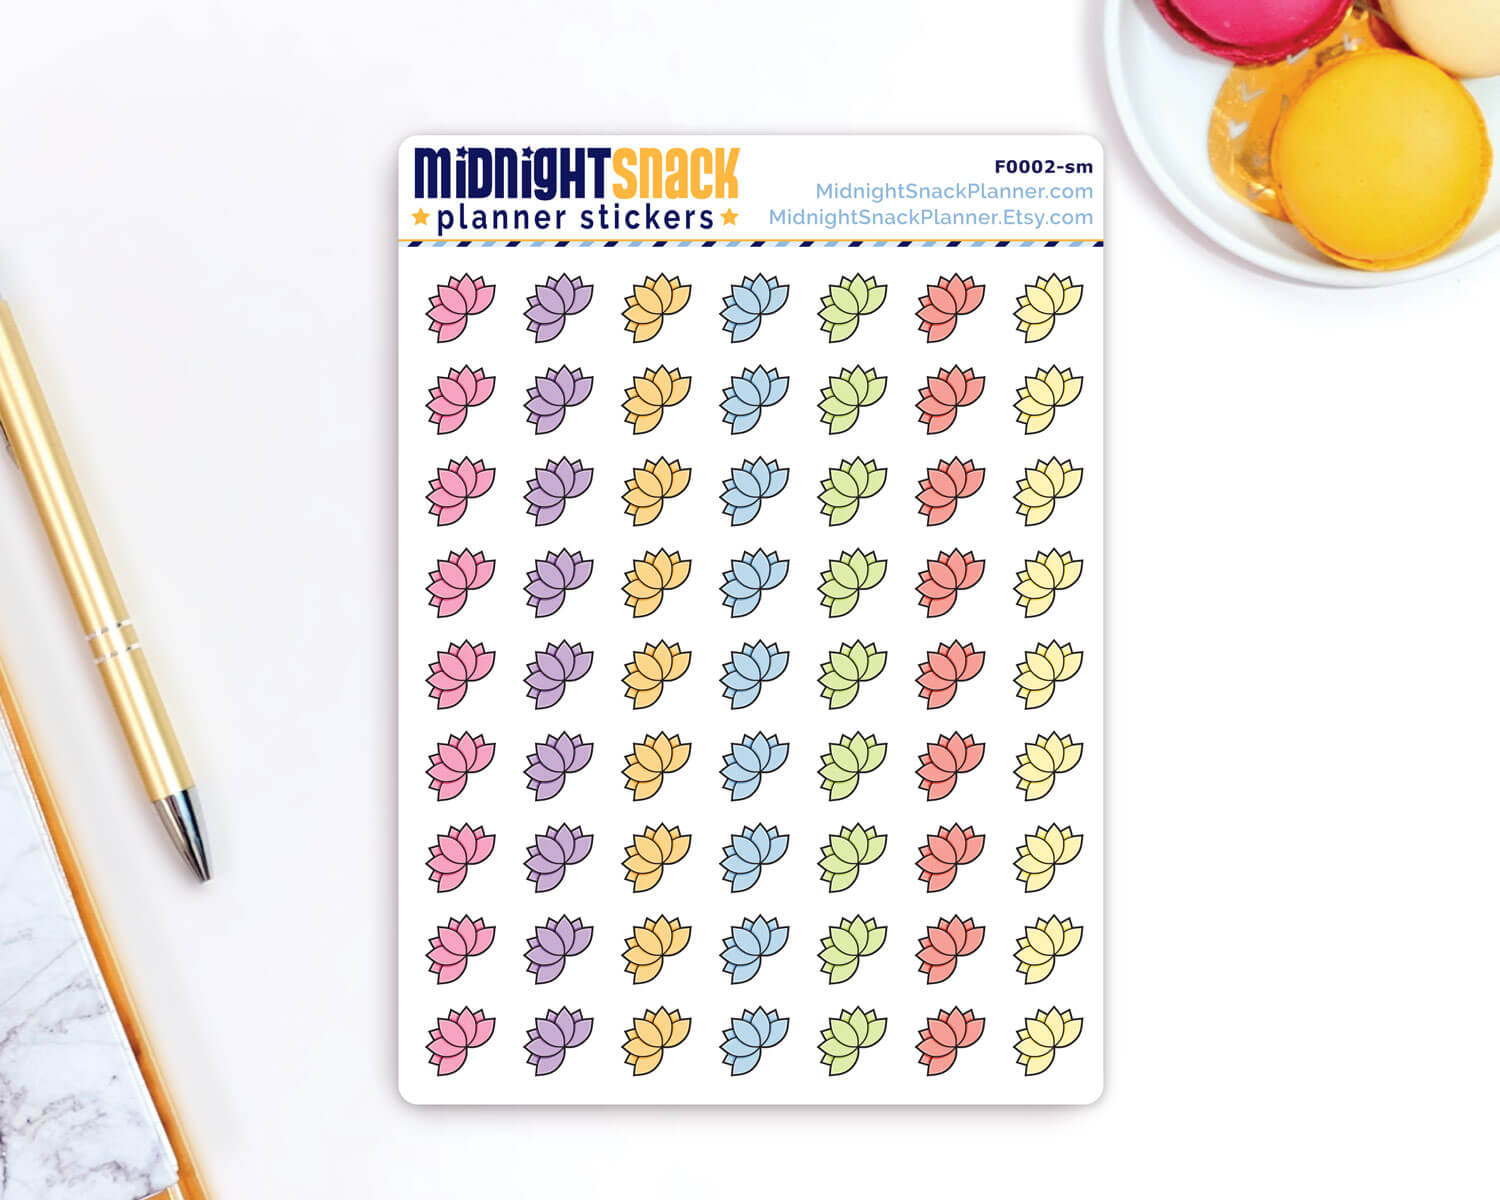 Small Lotus Flower Yoga Icon: Meditation, Health and Fitness Planner Stickers Midnight Snack Planner